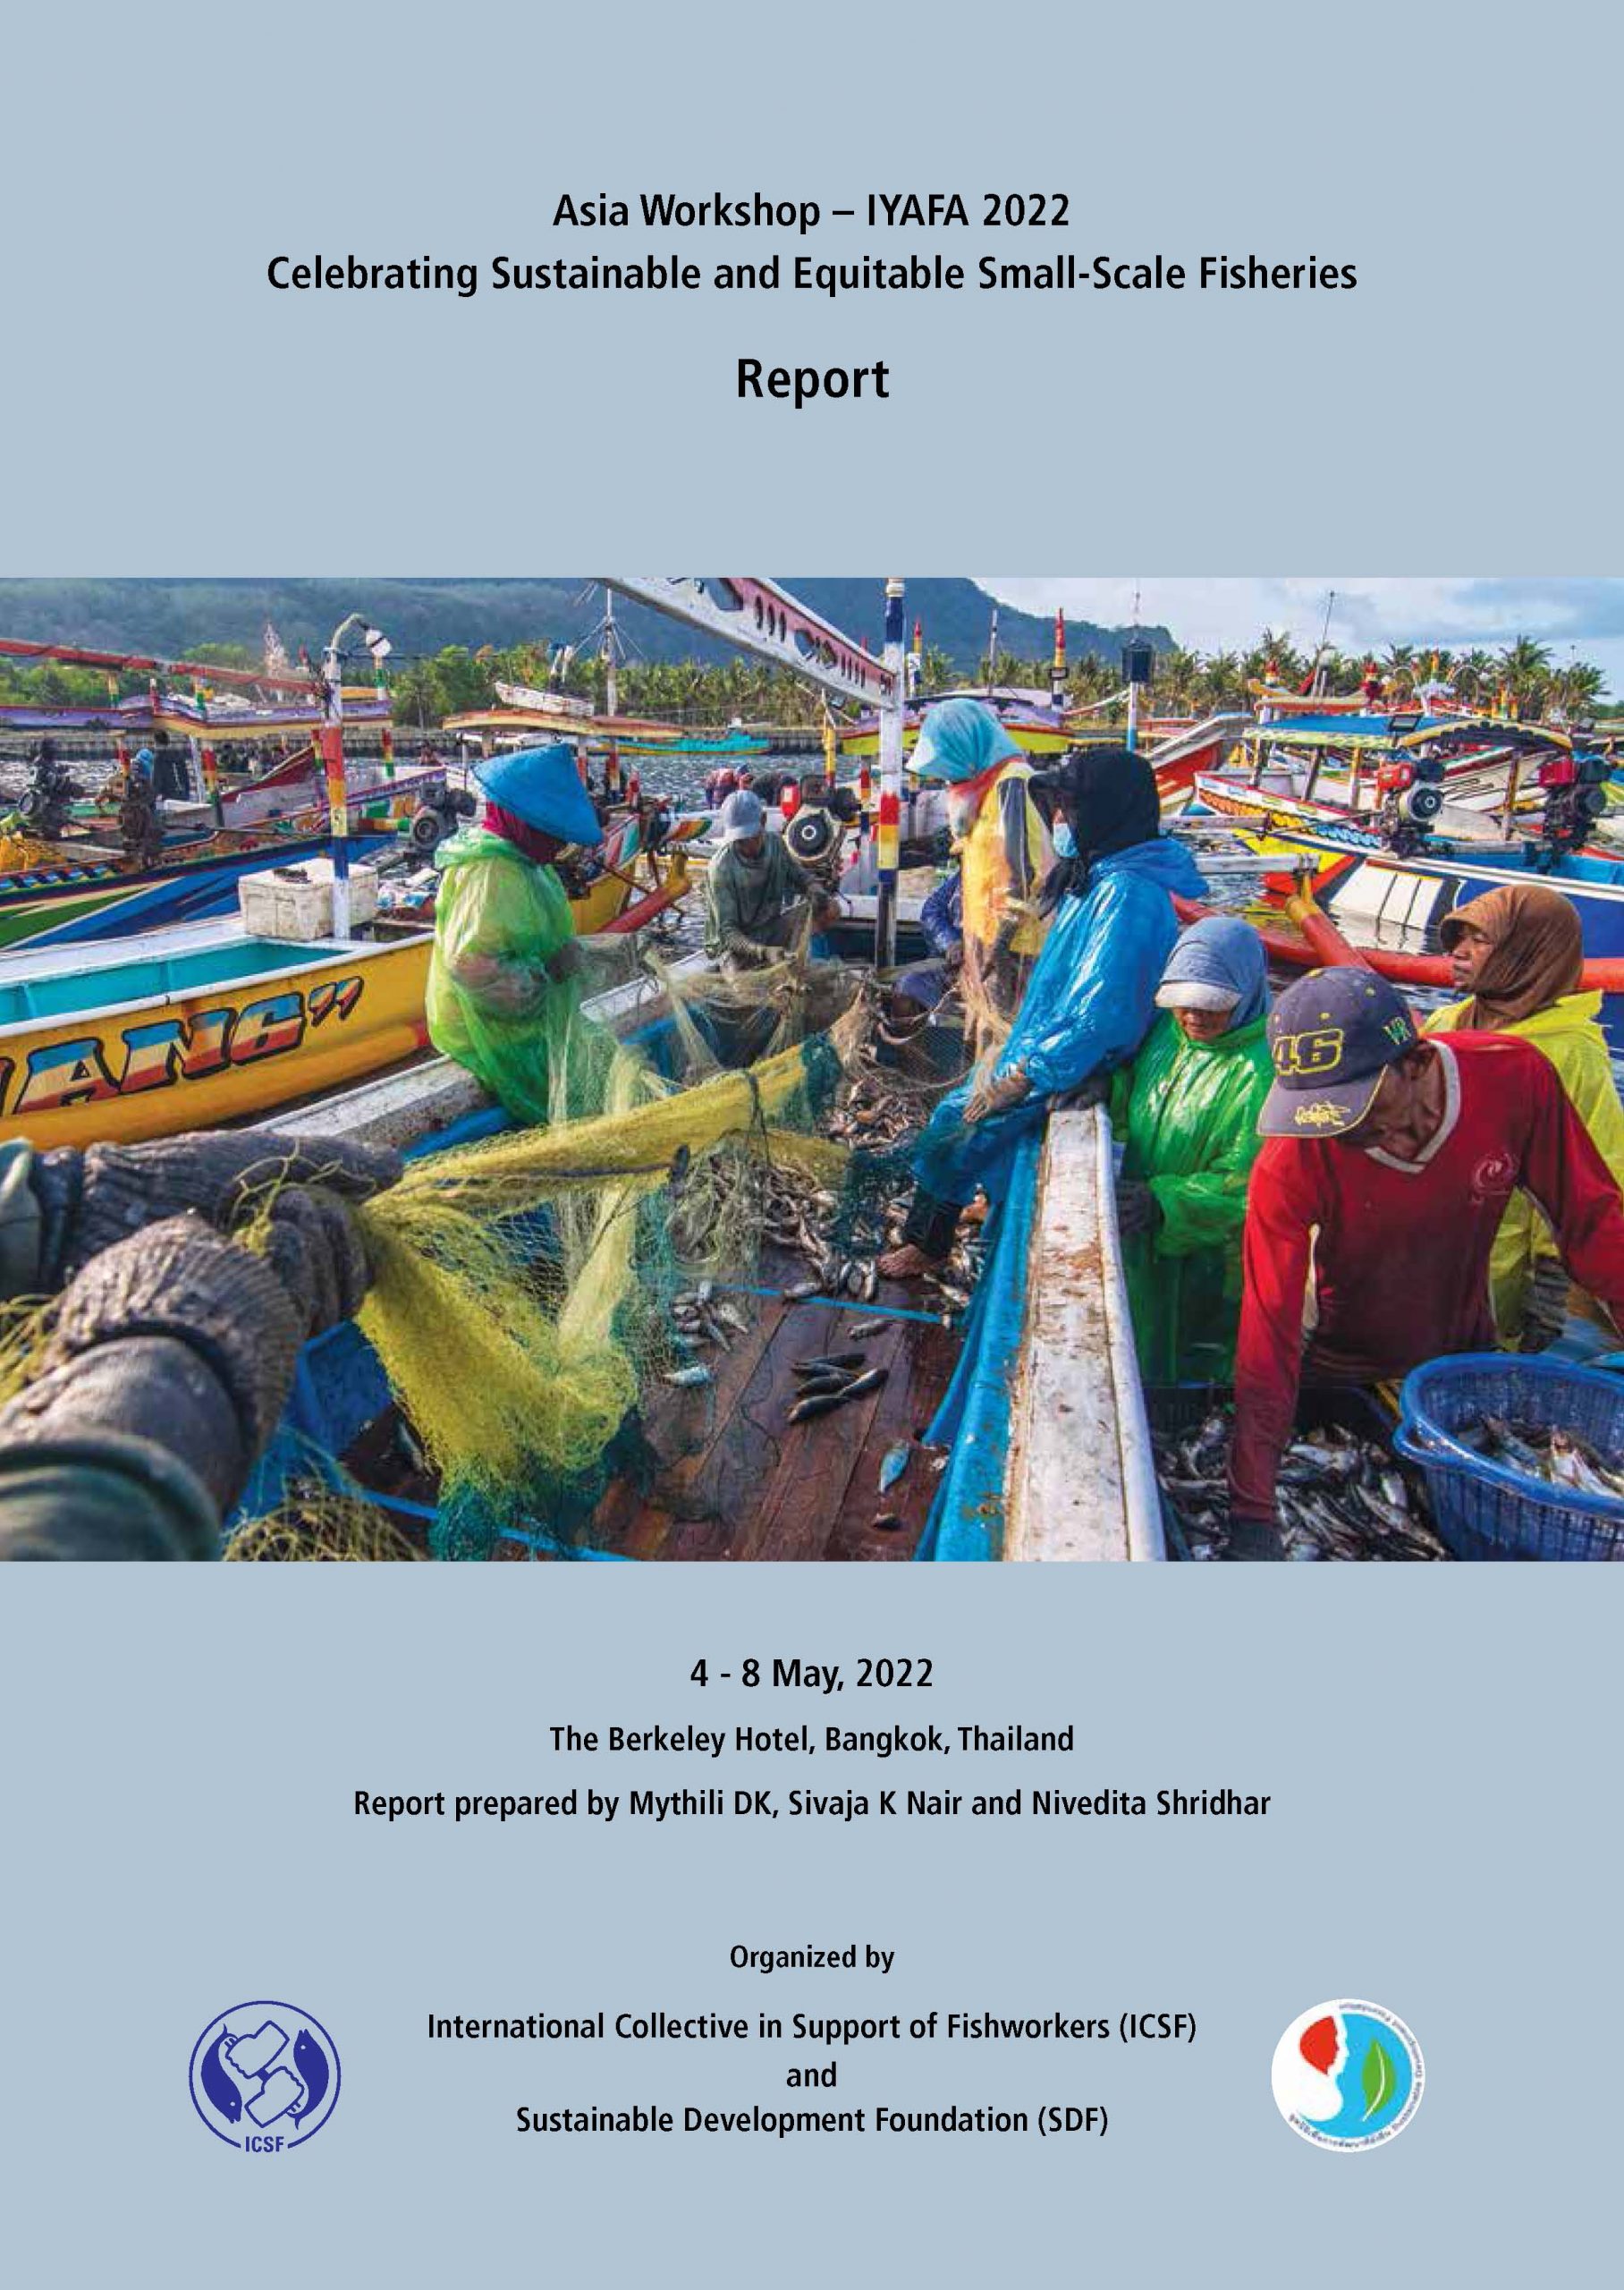 Report on Asia Workshop – IYAFA 2022: Celebrating Sustainable and Equitable Small-scale Fisheries, 4 – 8 May, 2022, The Berkeley Hotel, Bangkok, Thailand